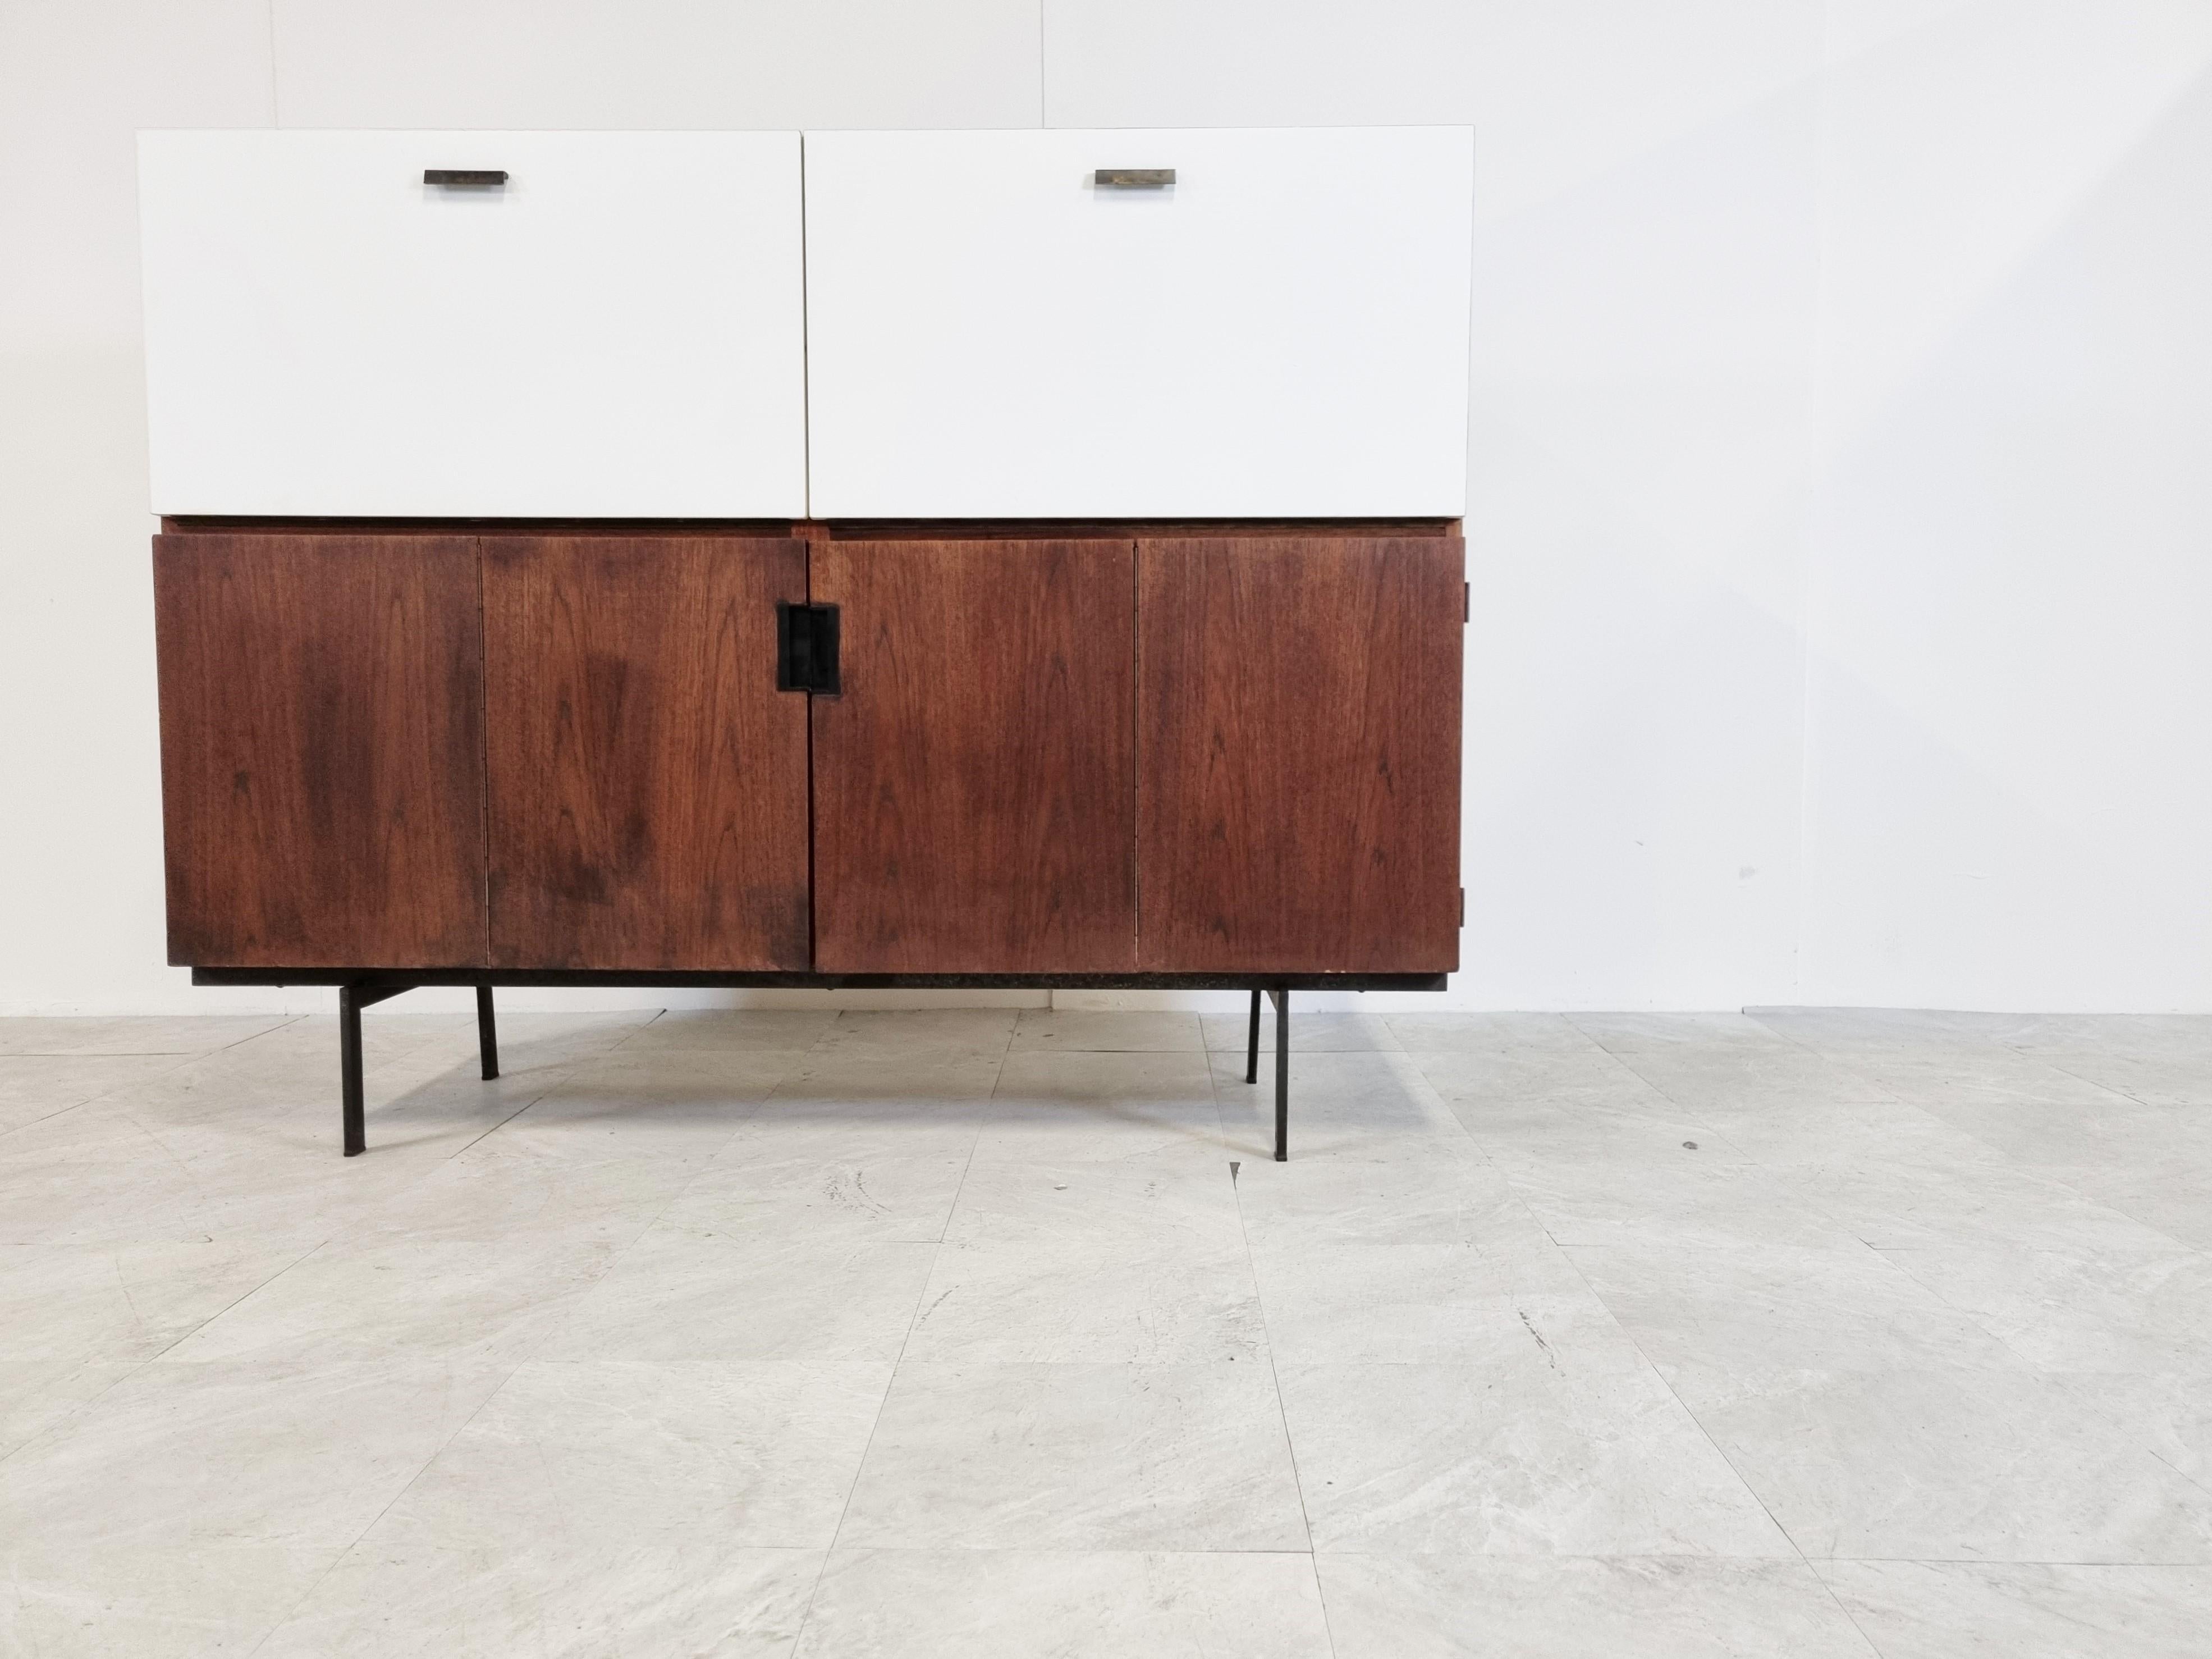 Mid-century teak cabinet designed by Cees Braakman for Pastoe 'Japanese series'.

Consists out of two double hinge doors and two white lacquered folding down doors.

Original lettre box and shelves still there.

Doorhandles have been replaced